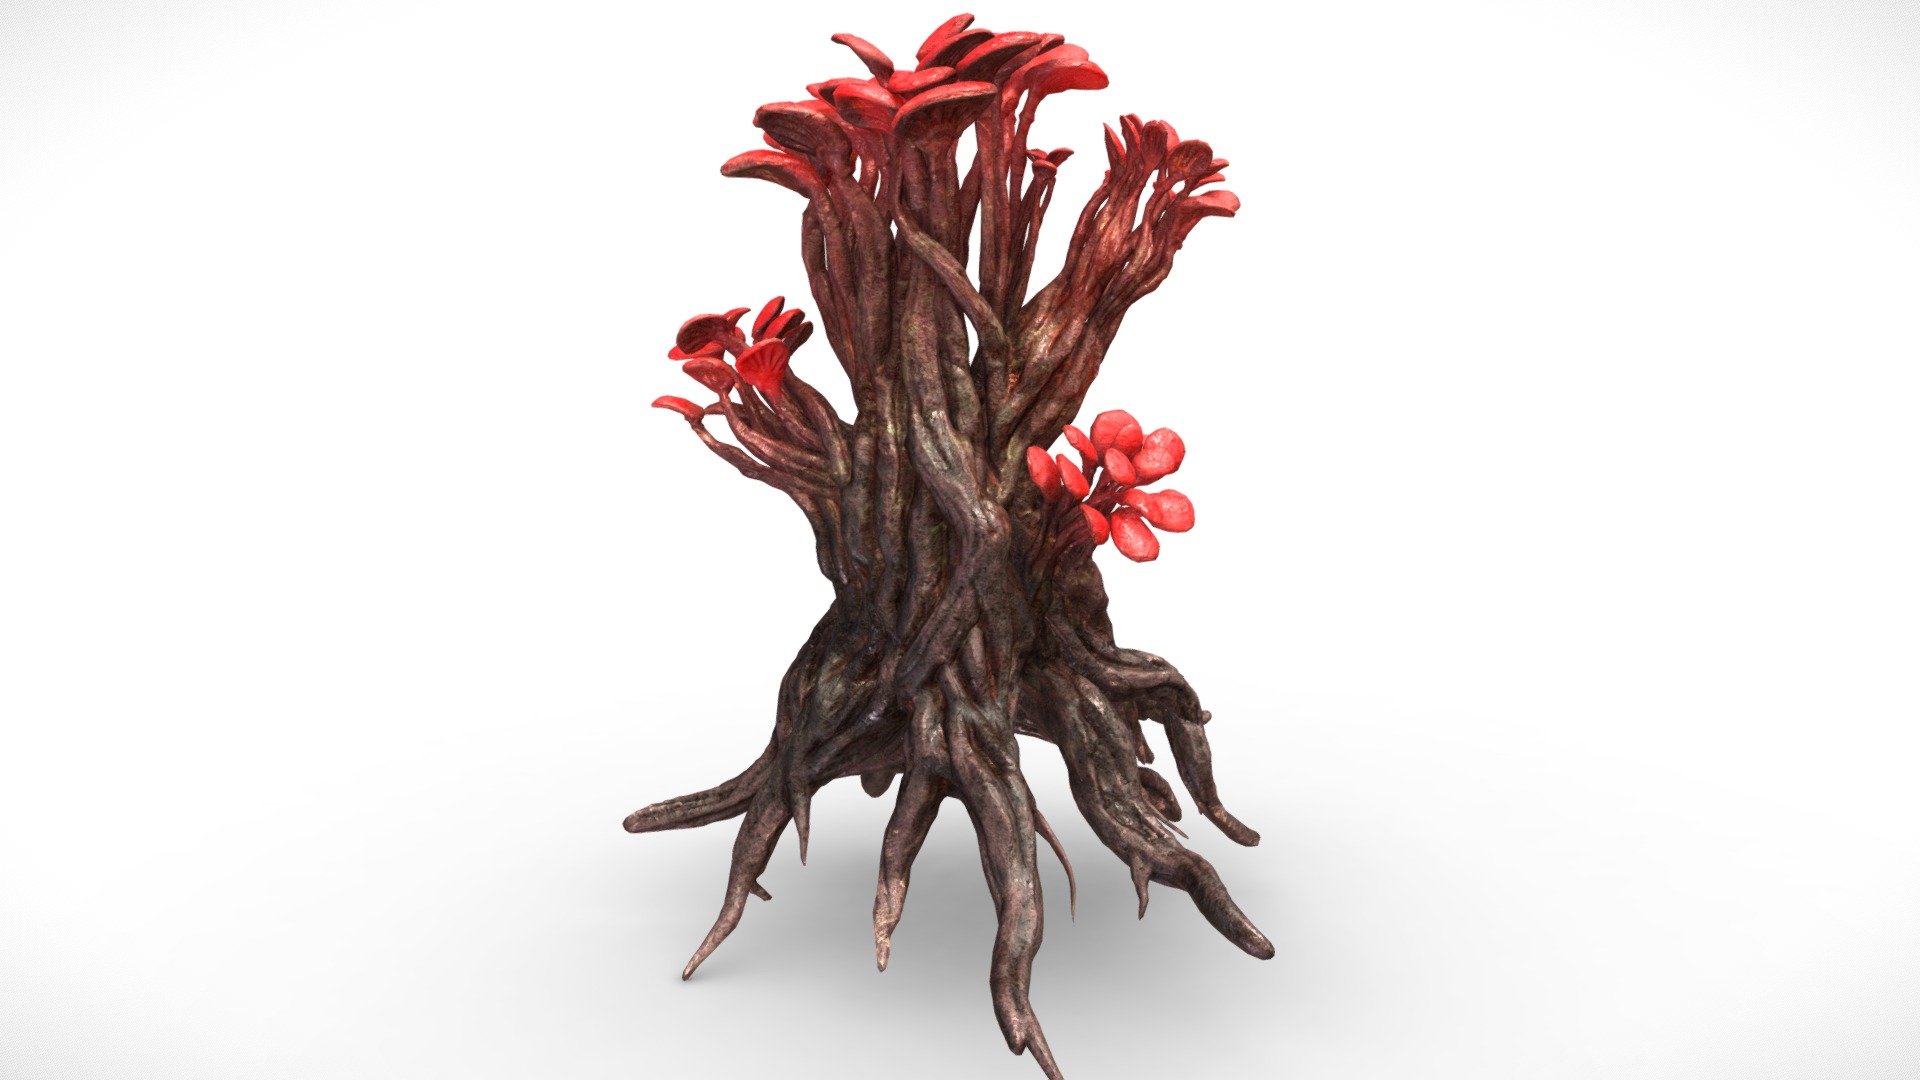 Comes with several 4096x4096 Textures, and two model variations.

Textures are:
* Diffuse
* Roughness
* Metallic
* Normal - Alien Plant Fantasy Mushroom Tree - Buy Royalty Free 3D model by Davis3D 3d model